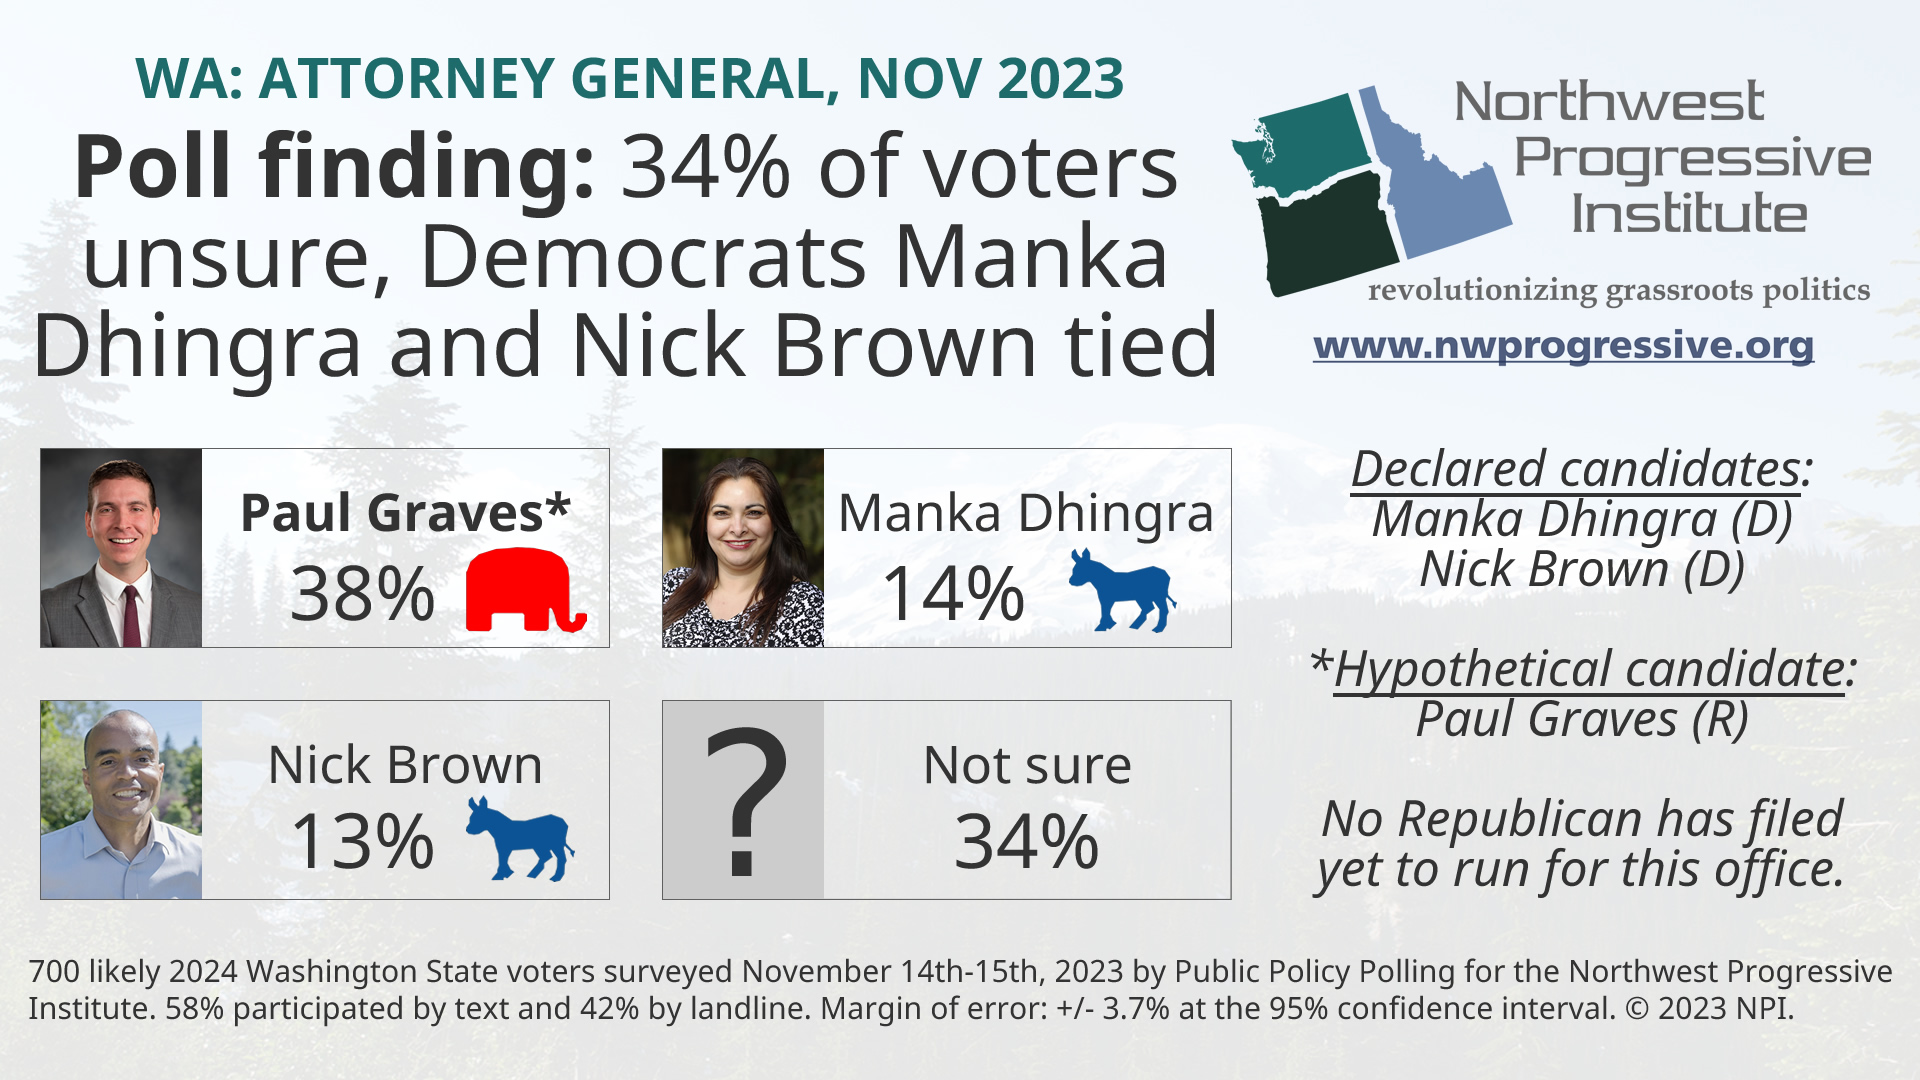 Visualization of NPI's November 2023 Attorney General poll finding